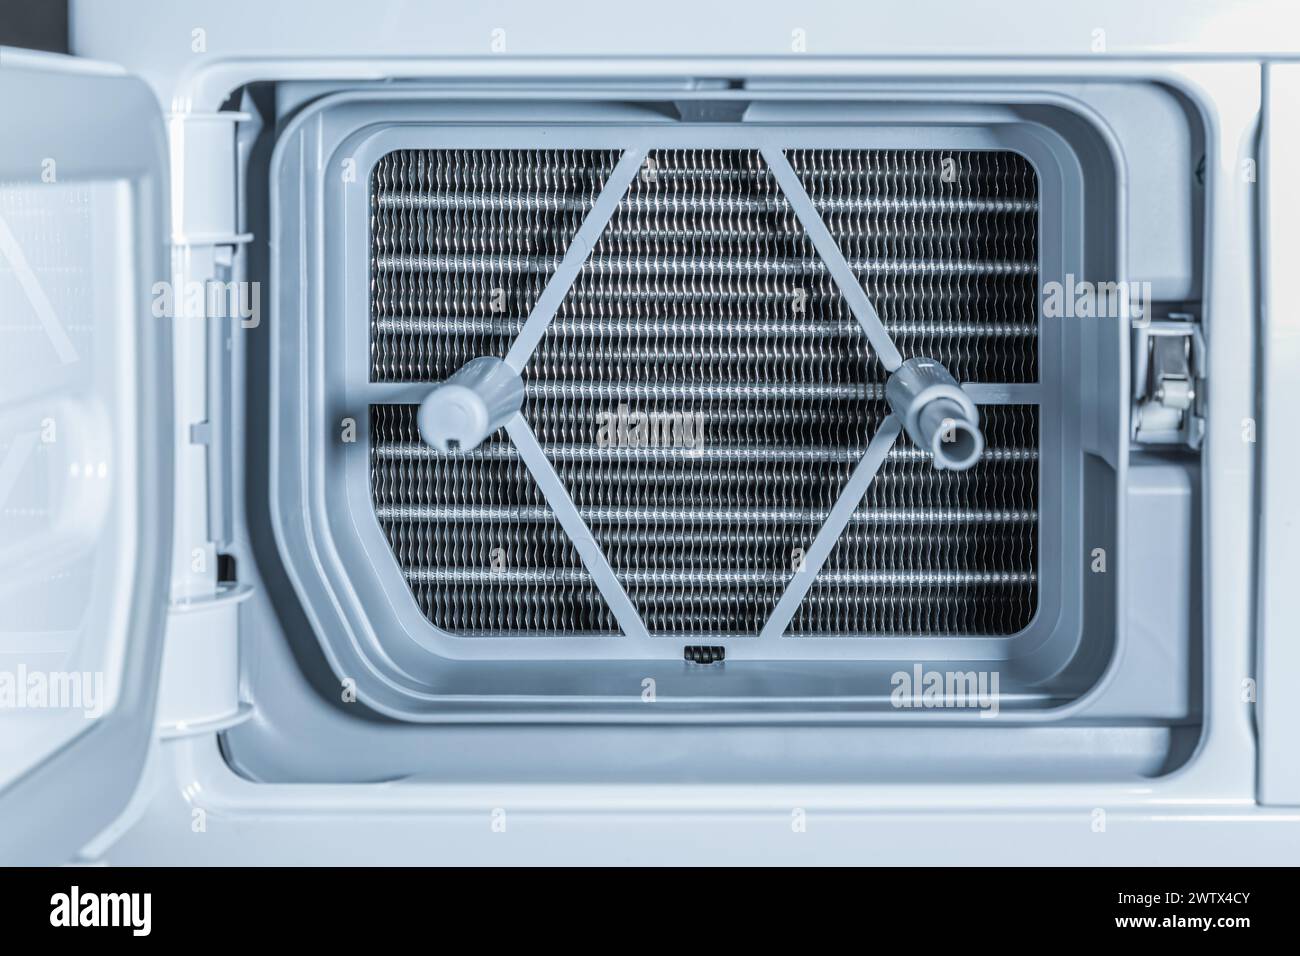 Detail of Heat pump dryer with heat exchanger and plinth filter Stock Photo